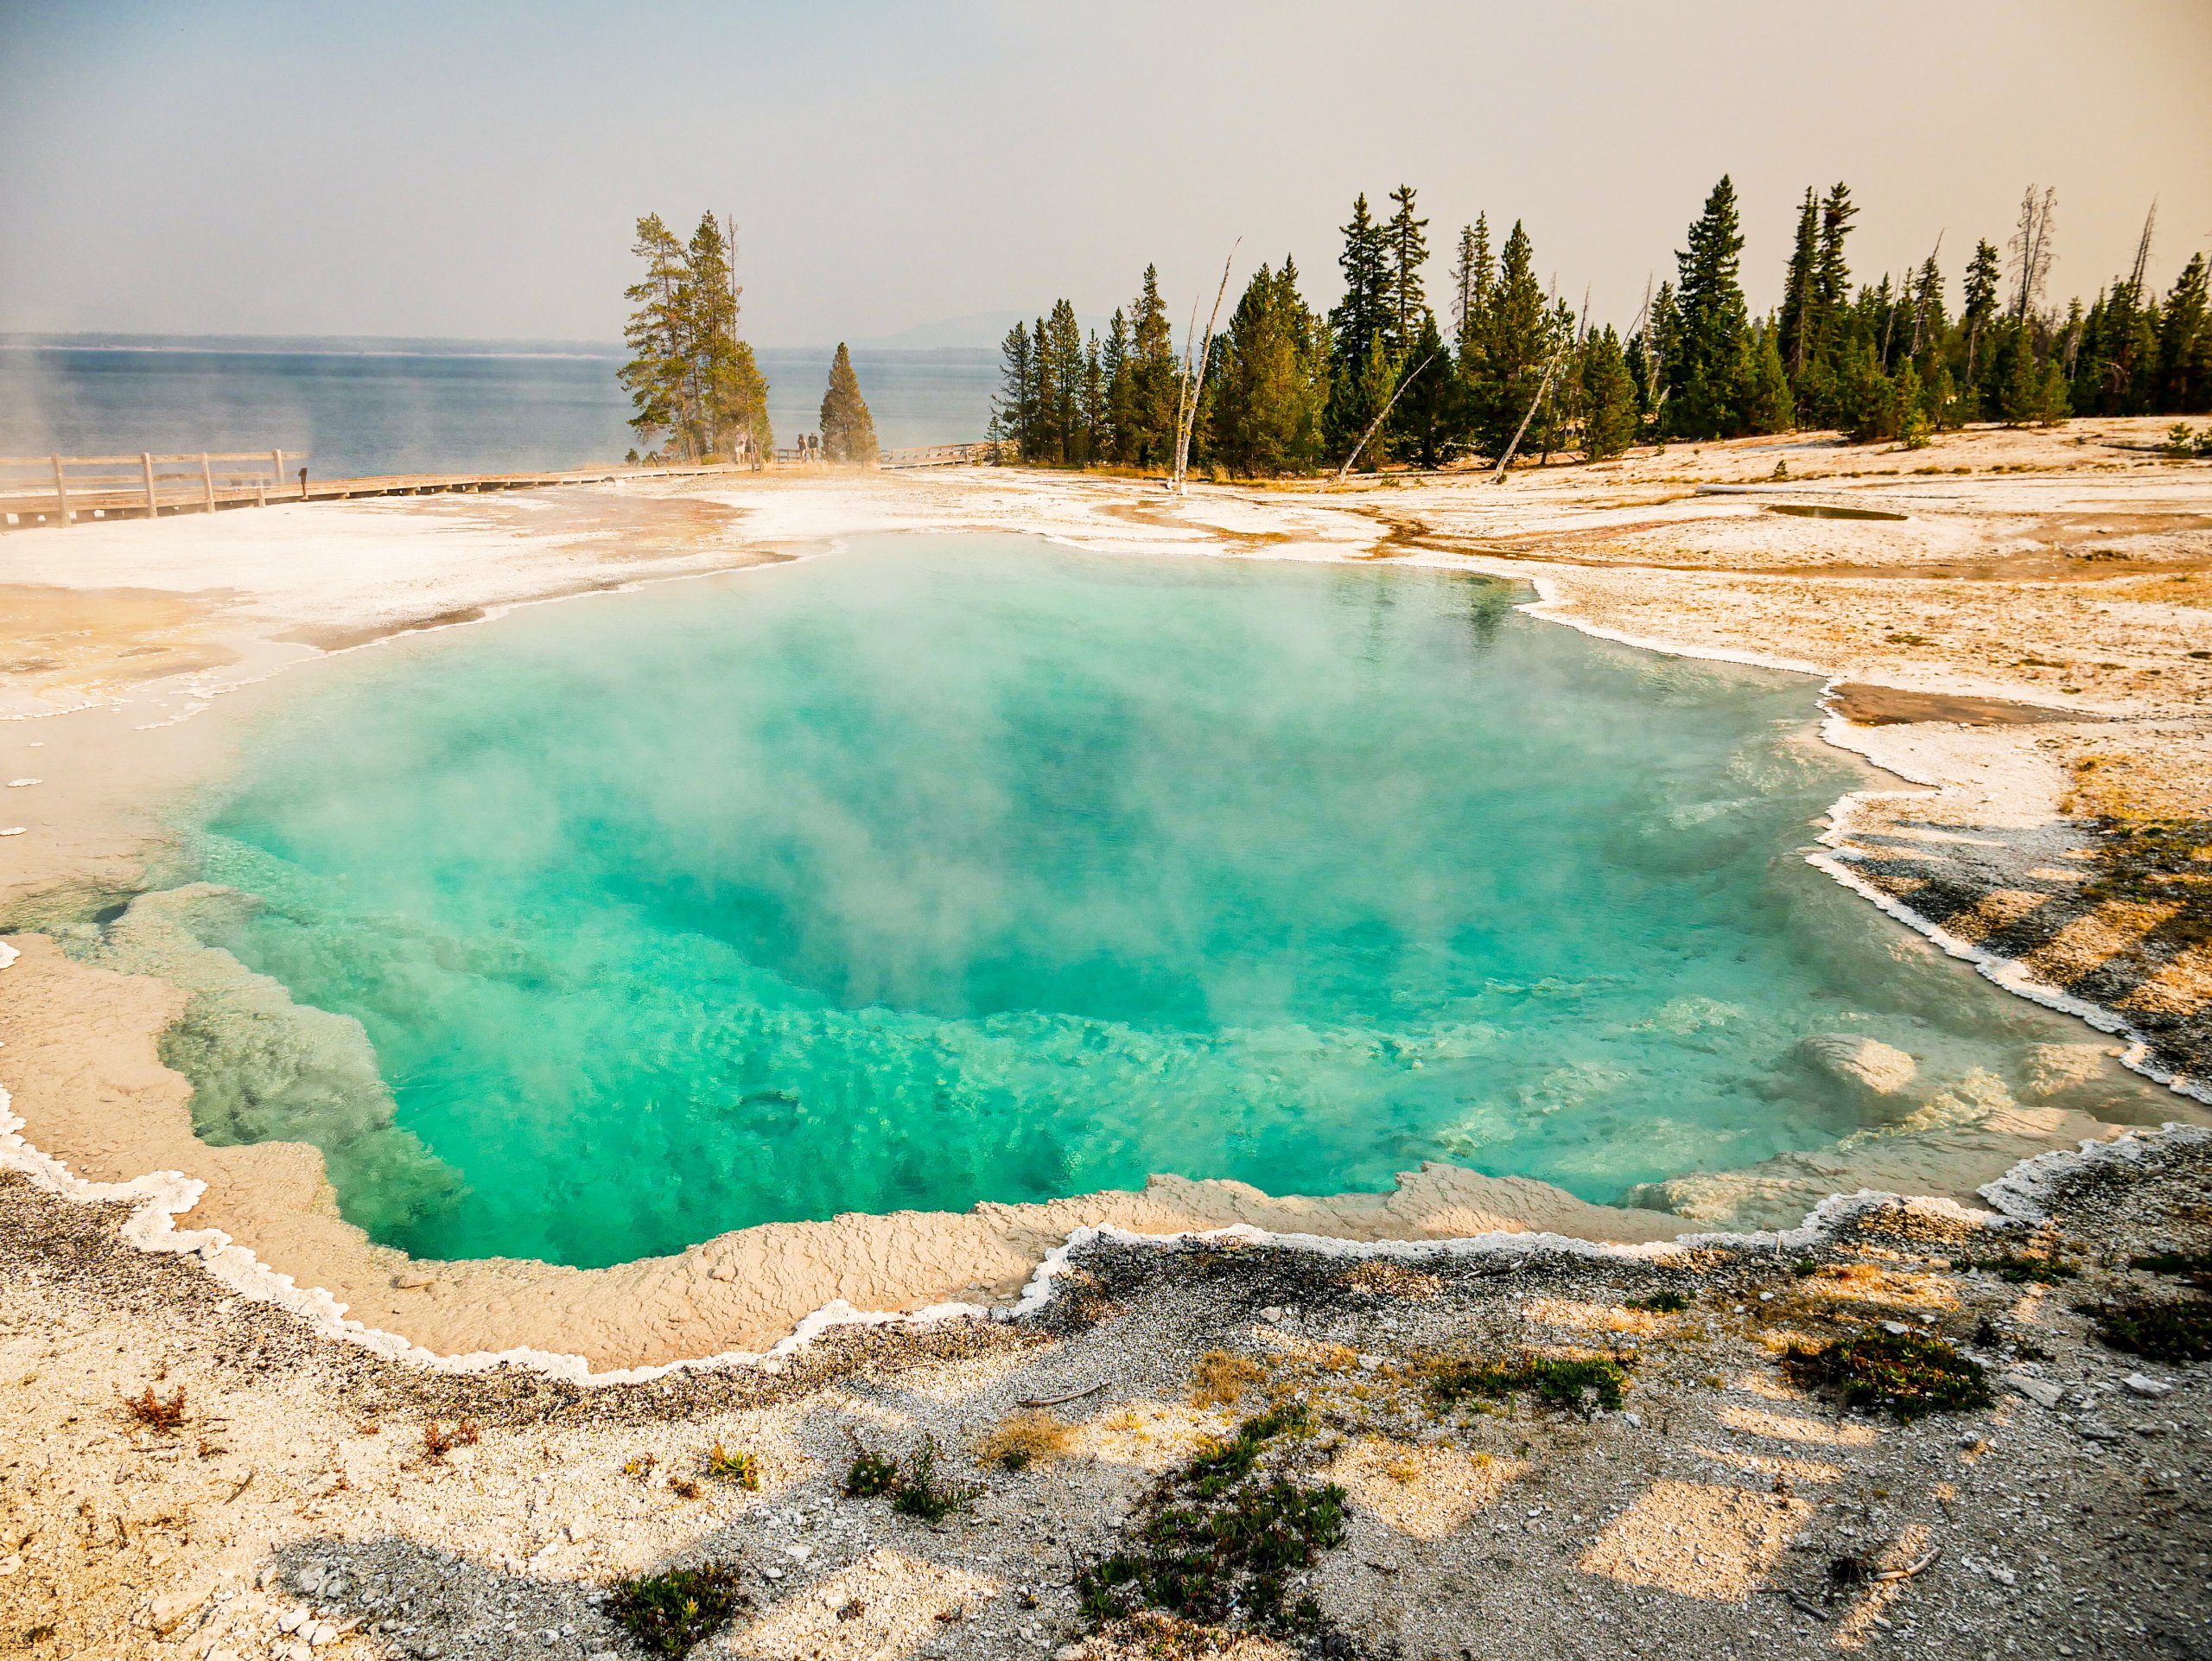 The Top 5 Things to do in Yellowstone National Park